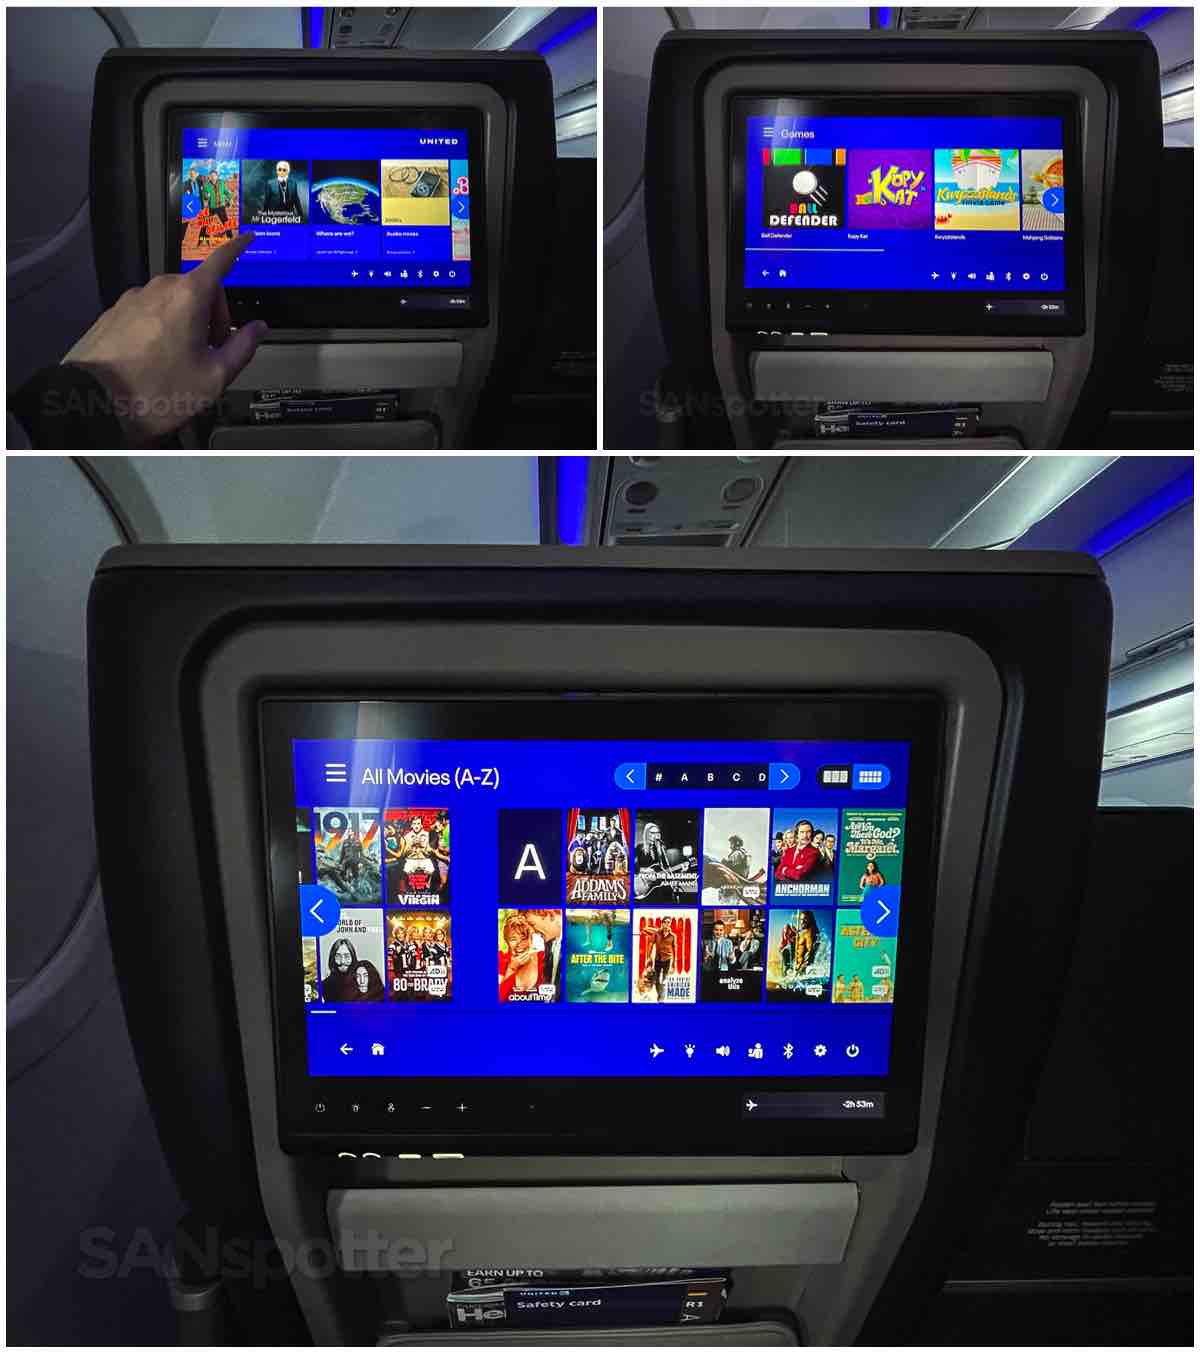 United A321neo first class in-flight entertainment movies and TV shows